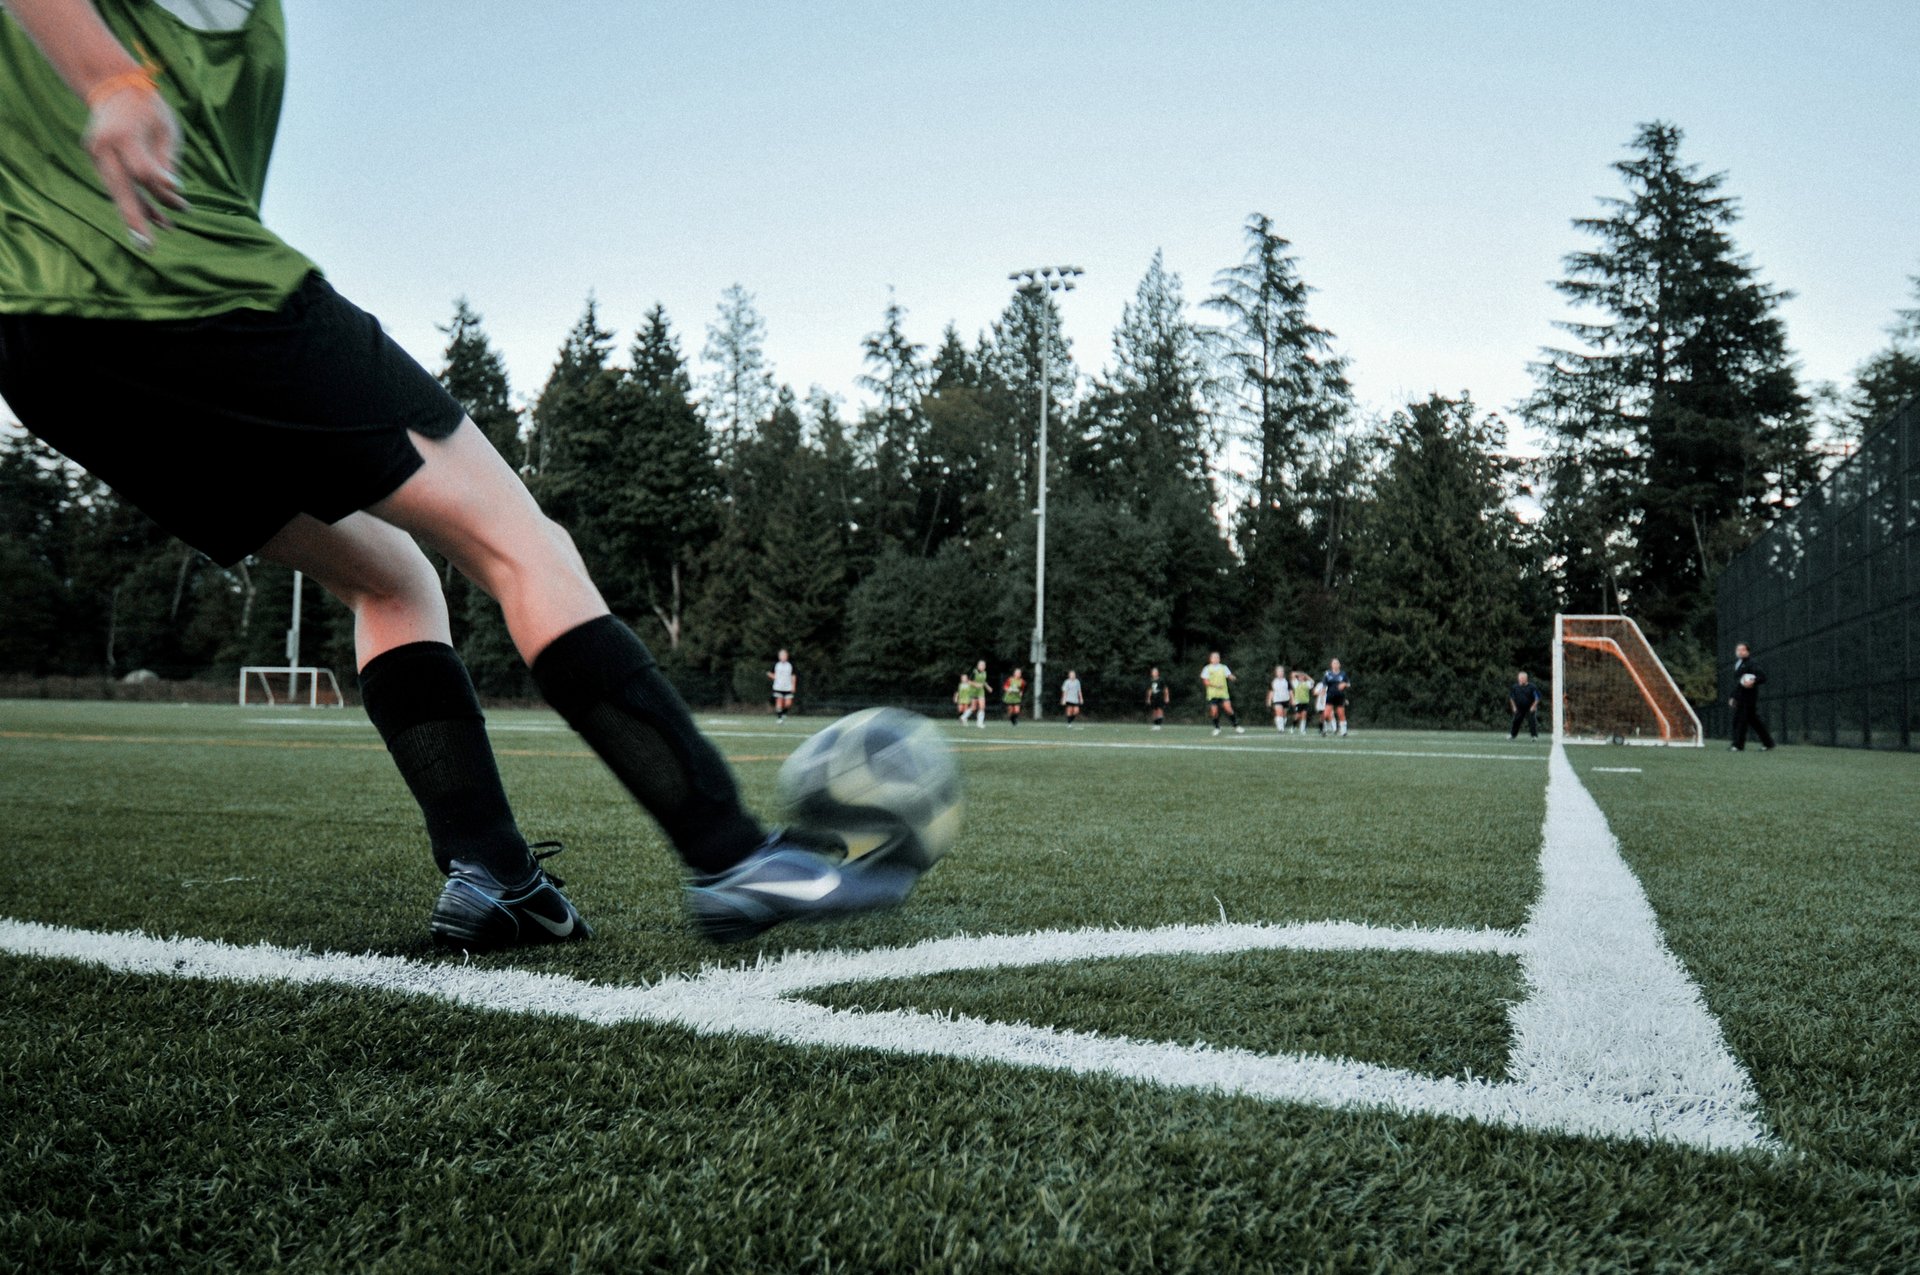 Soccer pitch, Surrey, BC